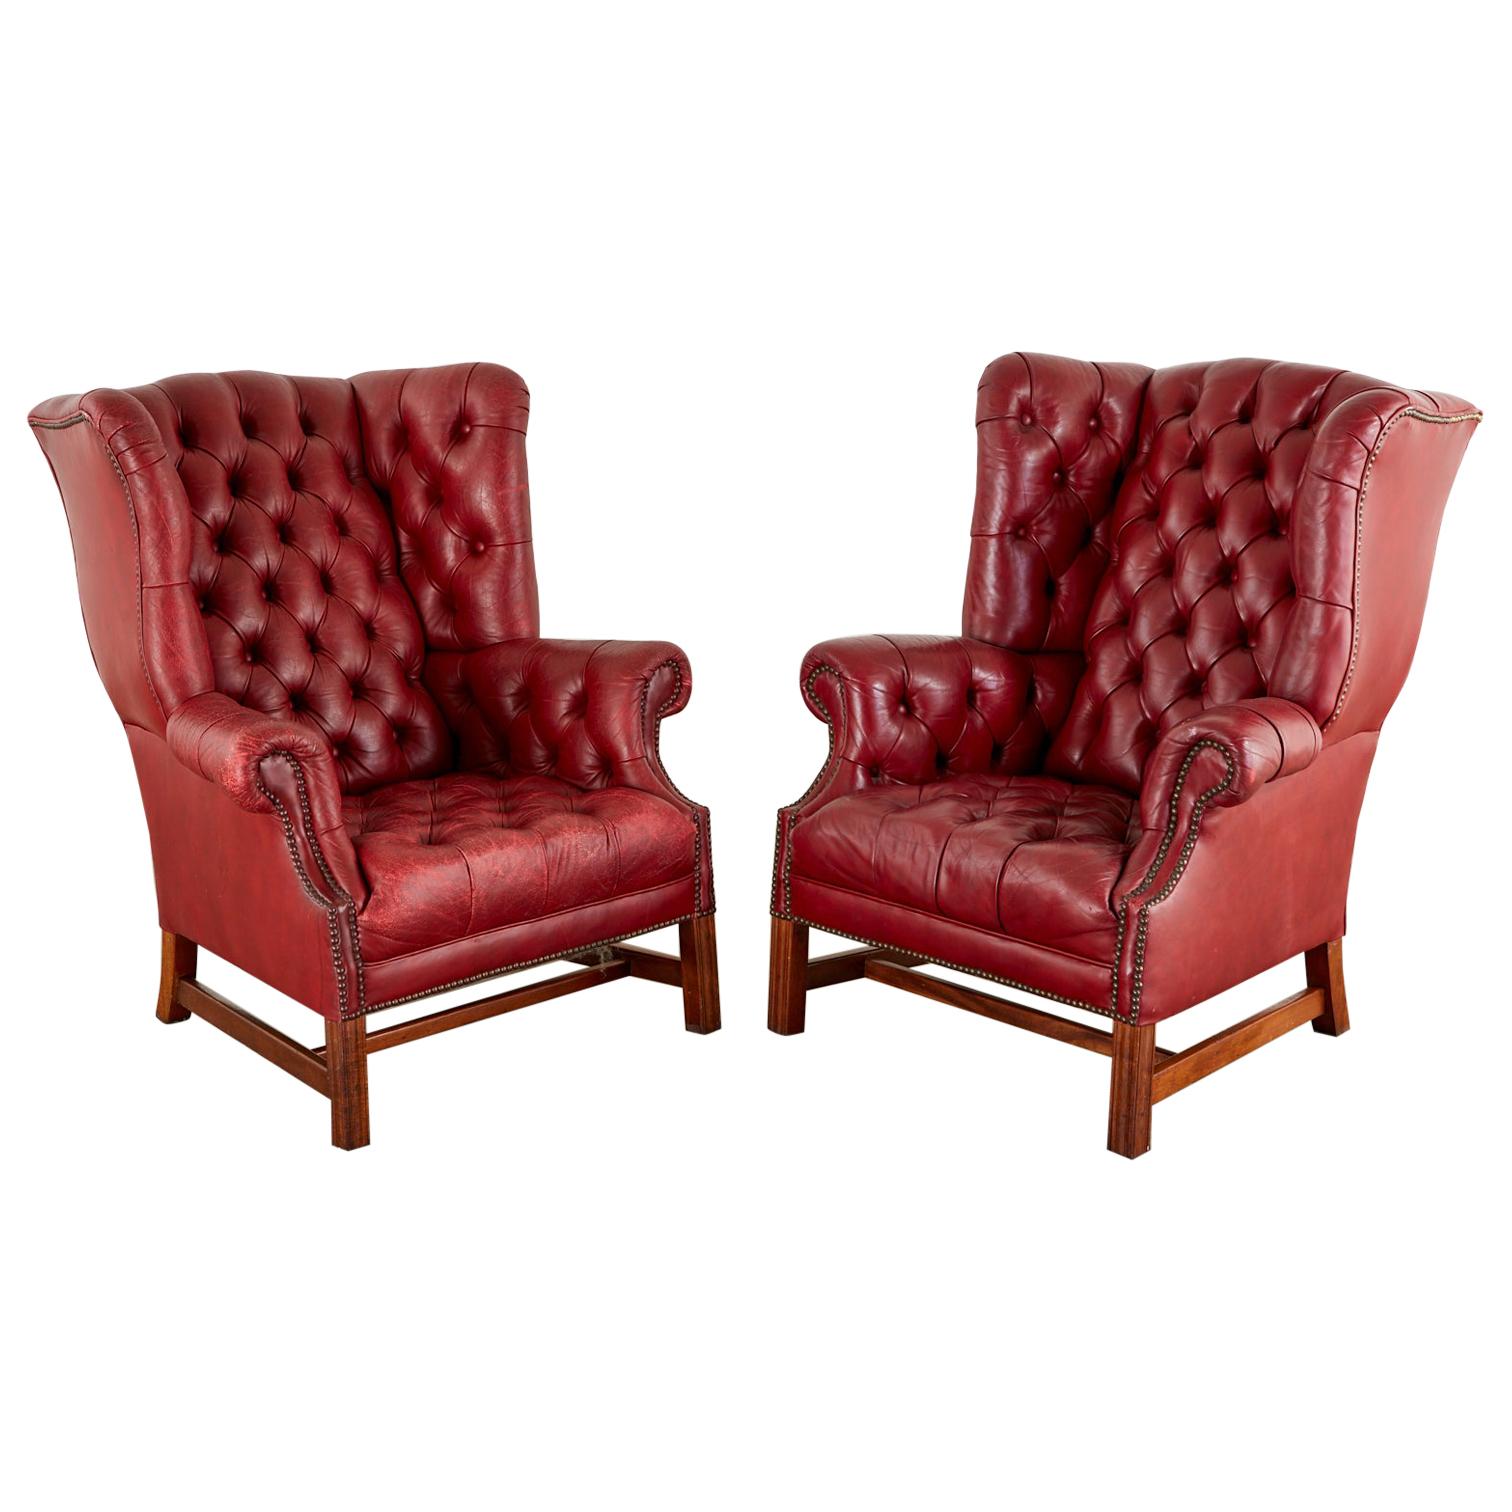 Pair of English Georgian Tufted Red Leather Wingback Chairs